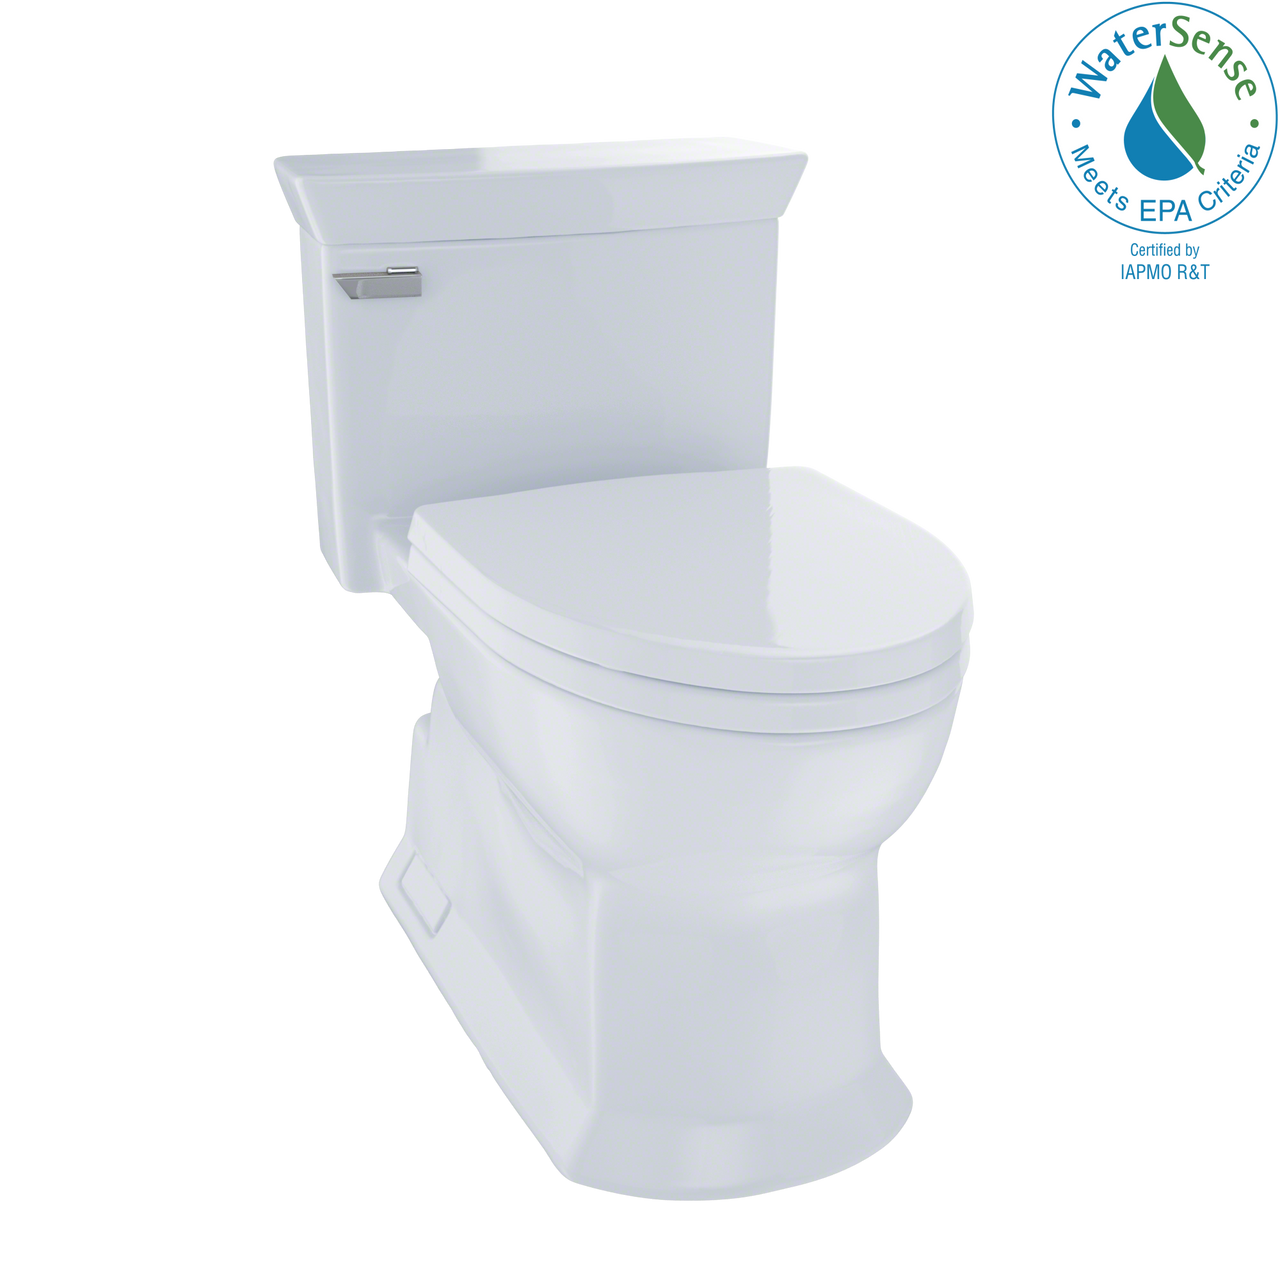 TOTO Eco Soir√©e One Piece Elongated 1.28 GPF Universal Height Skirted Toilet with CeFiONtect,  - MS964214CEFG#01 - BNGBath